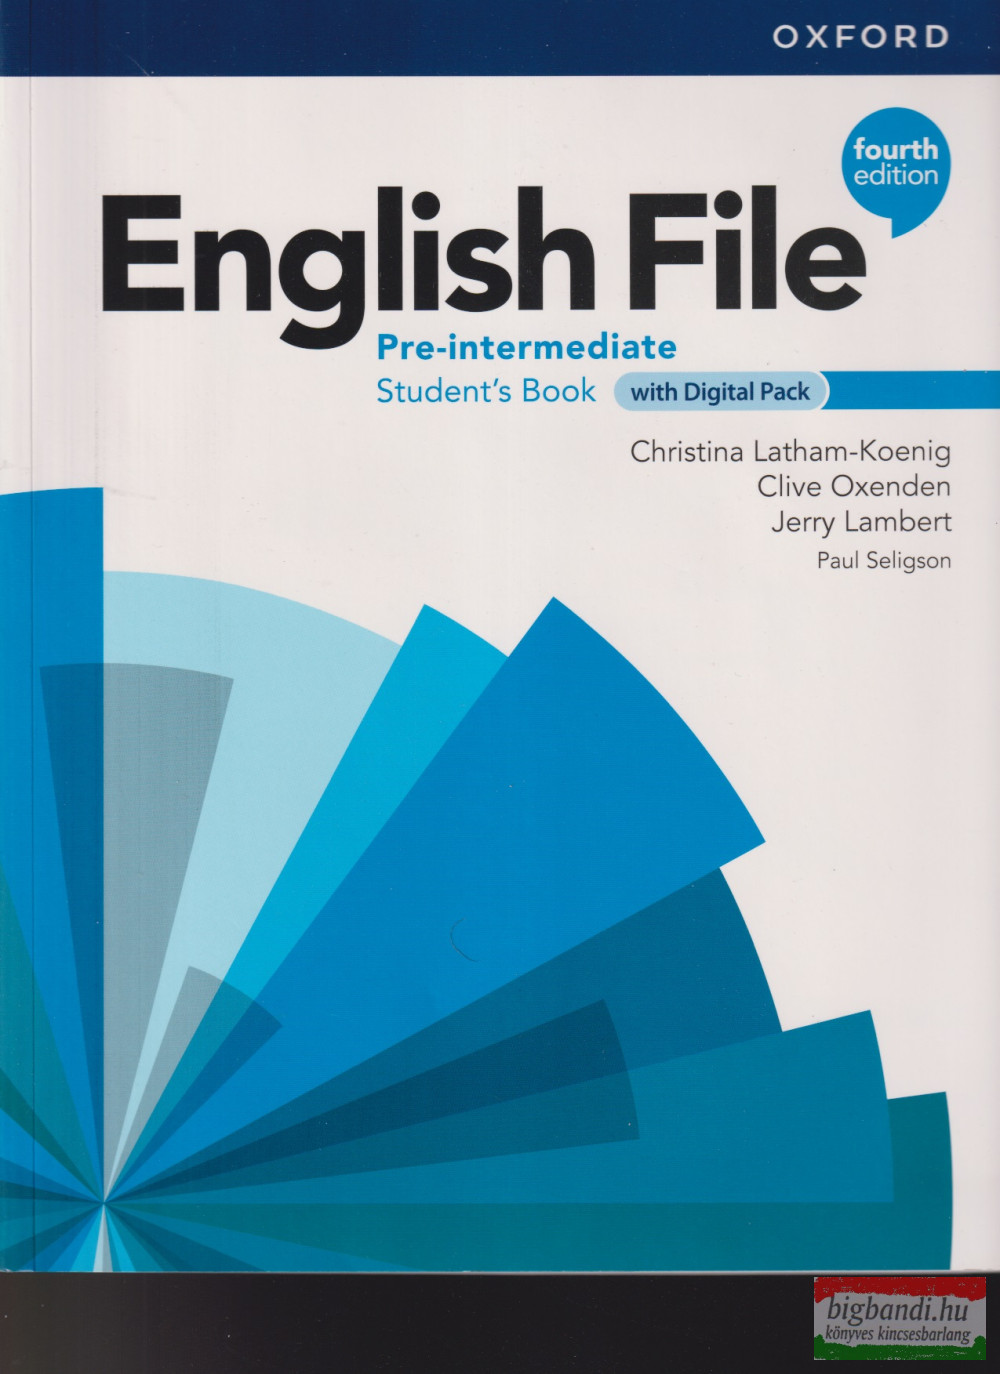 English File Pre-Intermediate 4th Ed. Student's Book - With Digital Pack